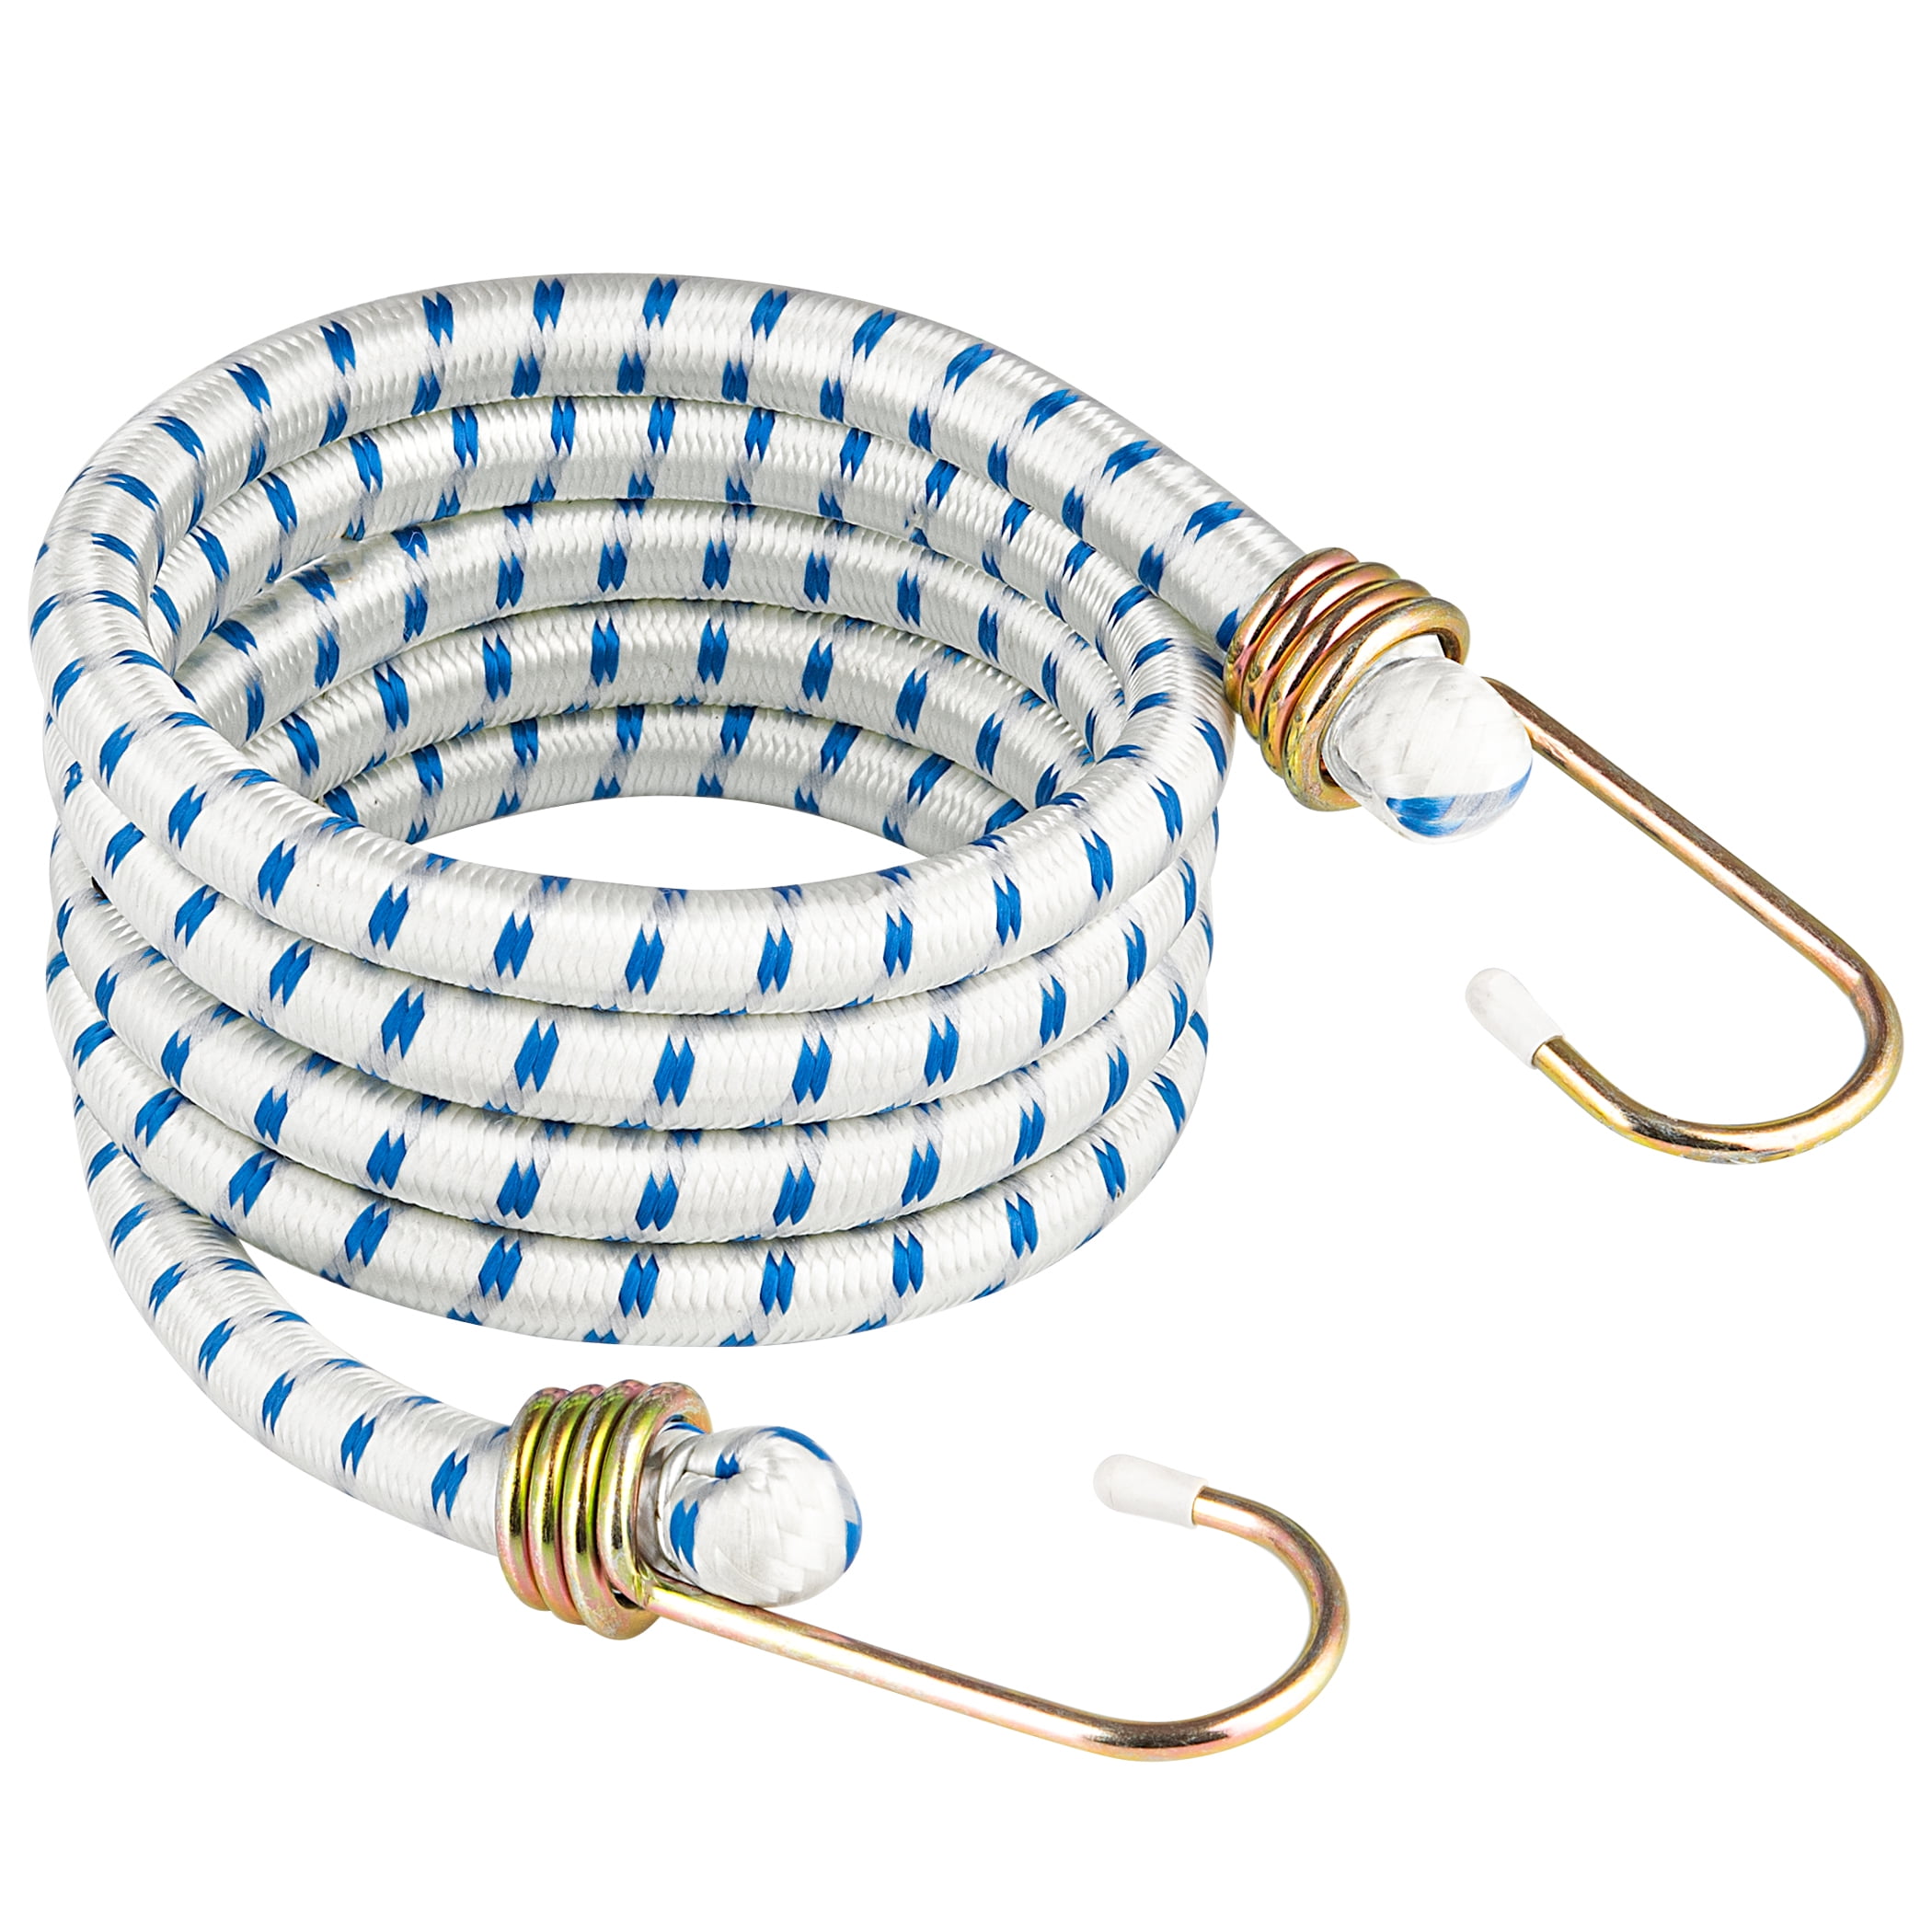 ProSource FH64030 Braided Stretch Heavy Duty Stretch Cord Set With Steel  Hook Ends 20 Piece: Bungee Cords ++ (045734962897-1)